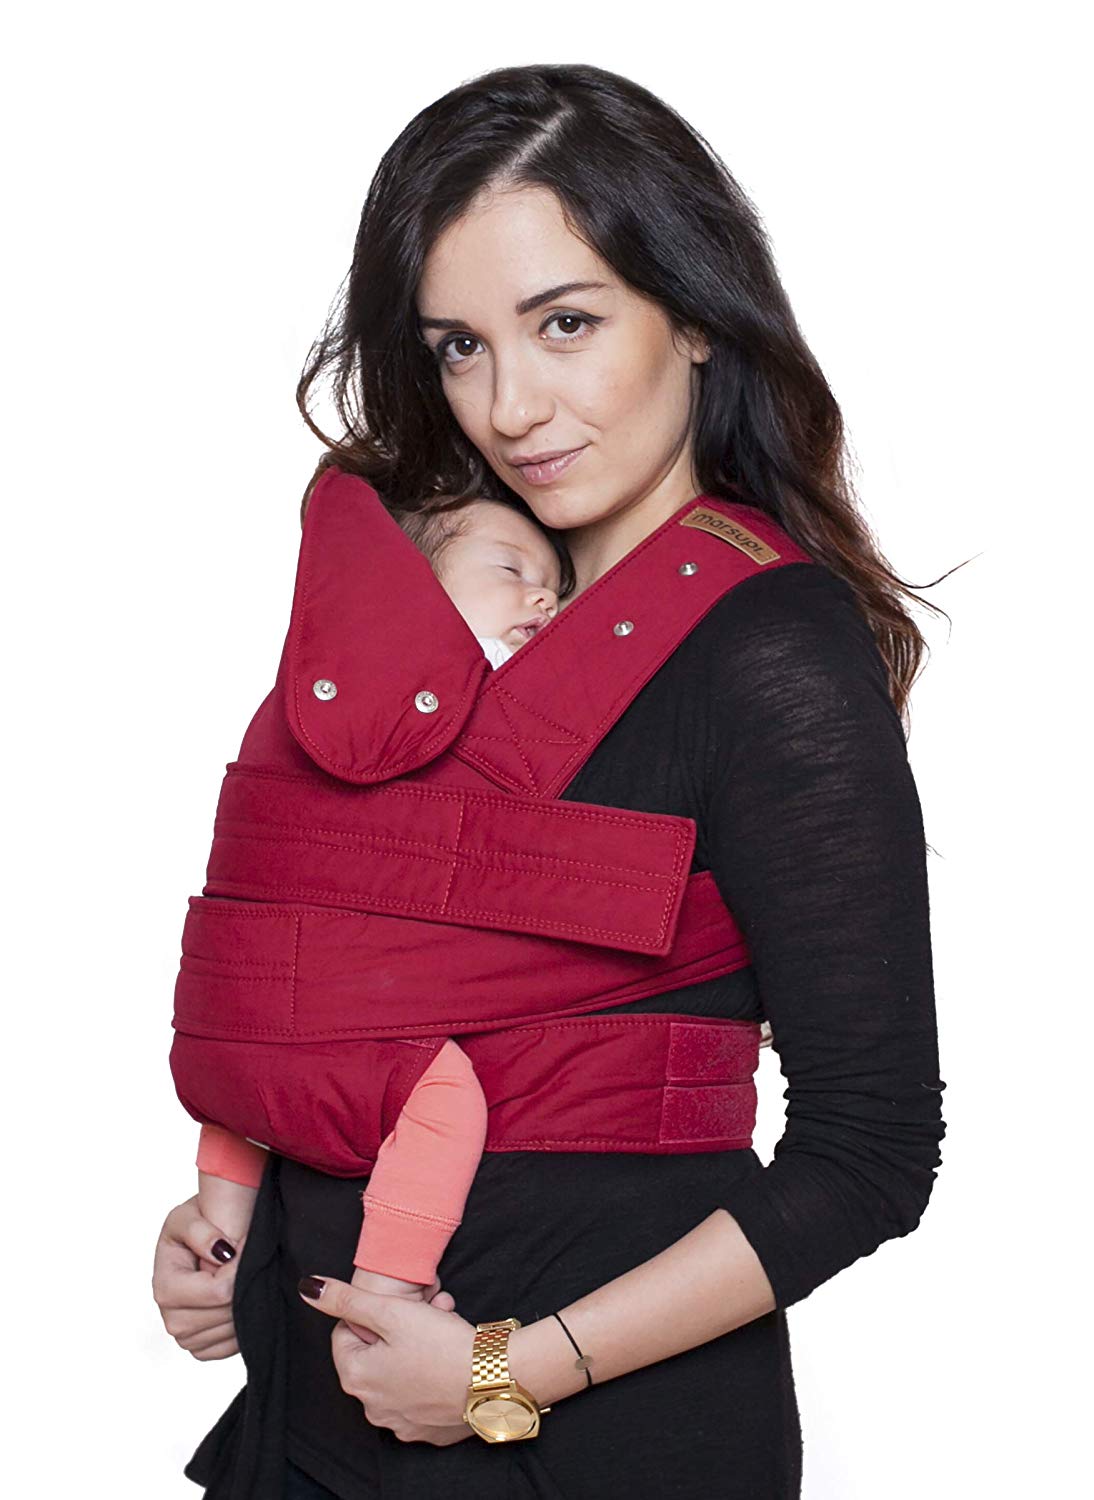 V baby carrier. Classic xl